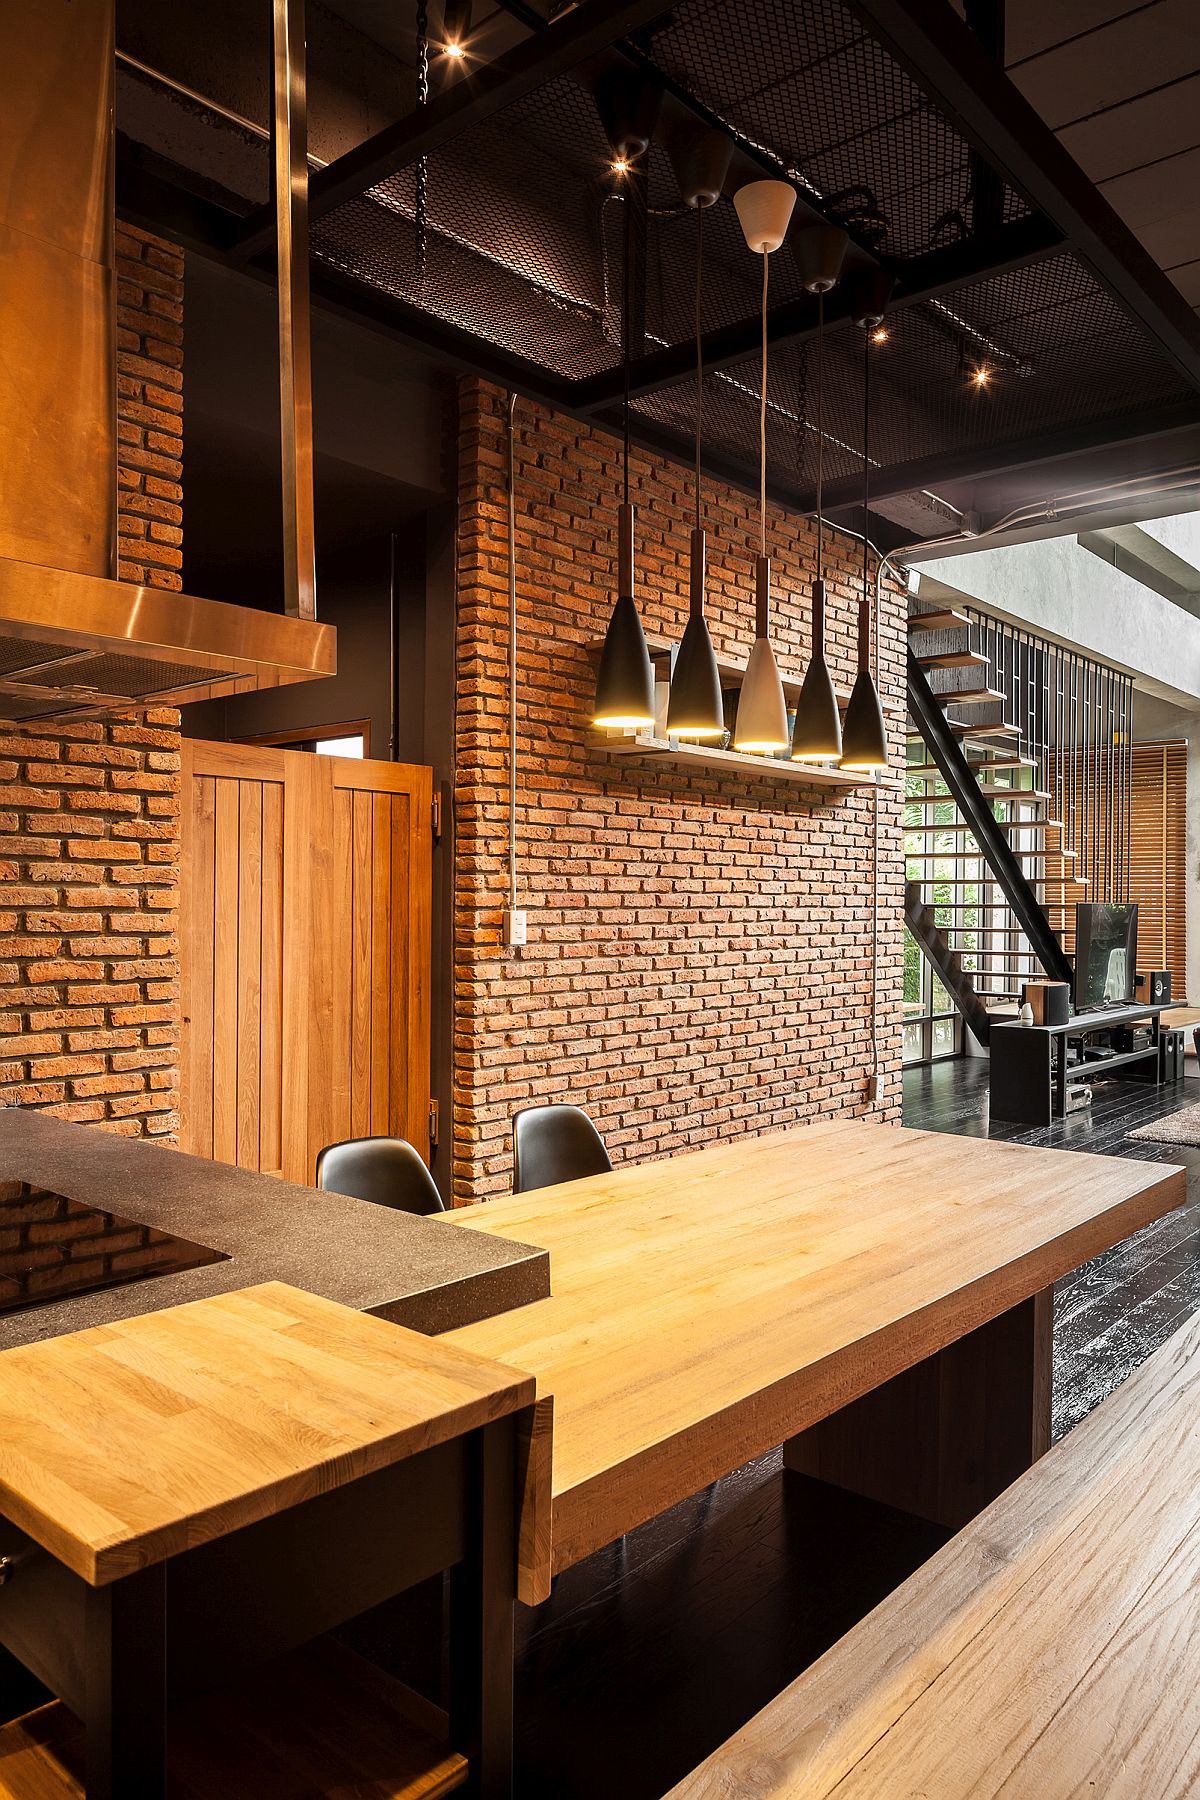 Wooden tables and industrial lighting for the kitchen and dining area